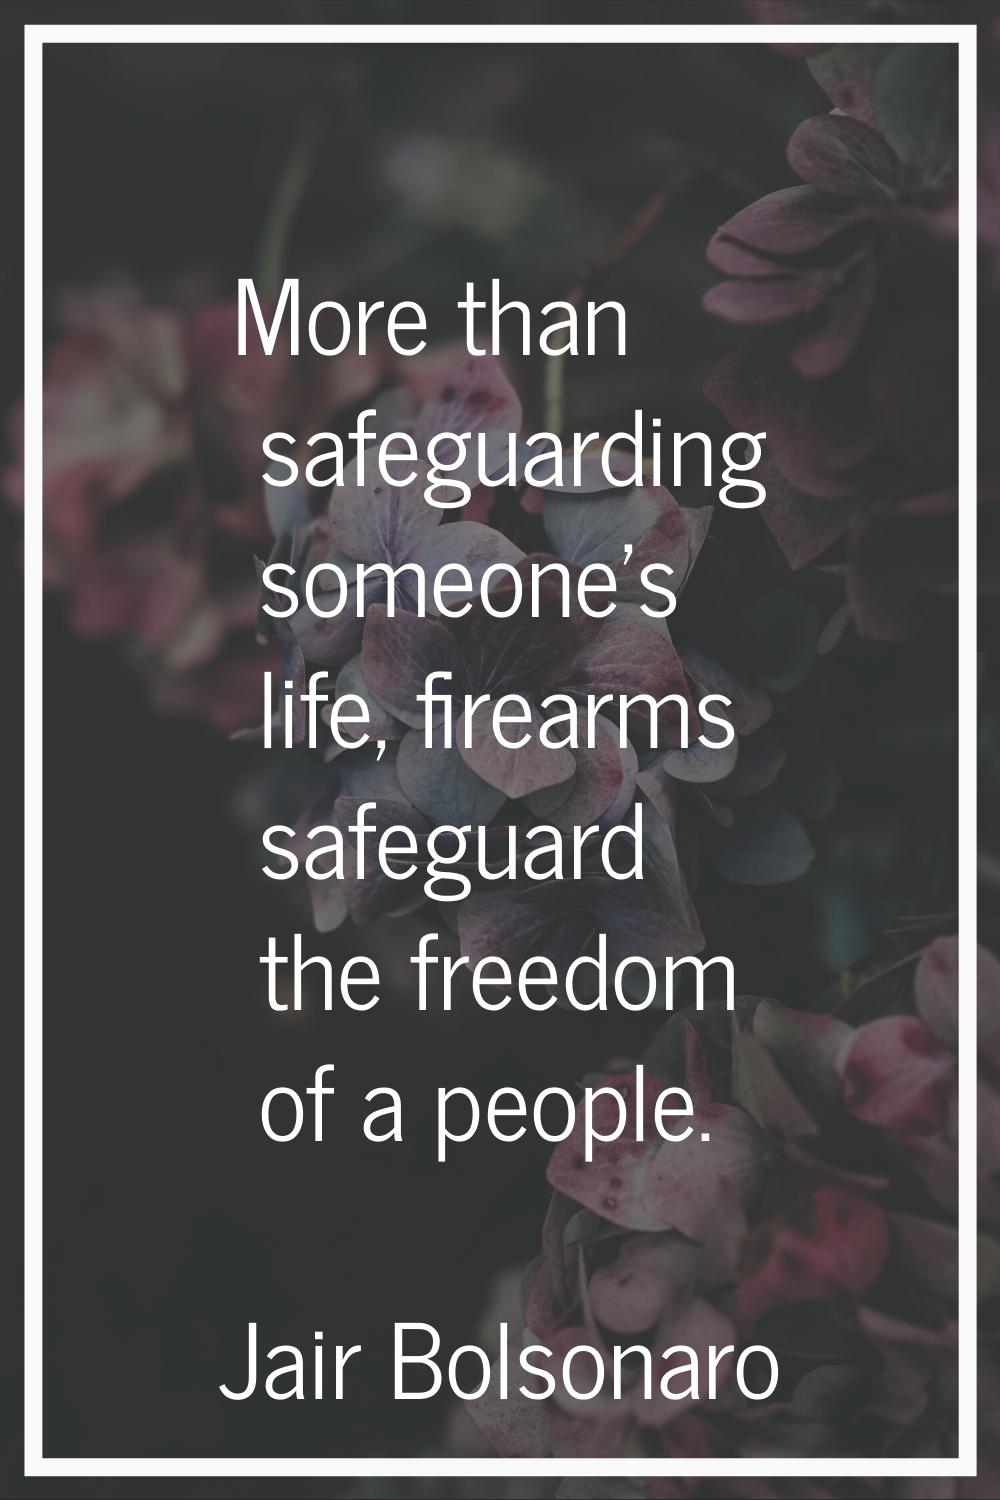 More than safeguarding someone's life, firearms safeguard the freedom of a people.